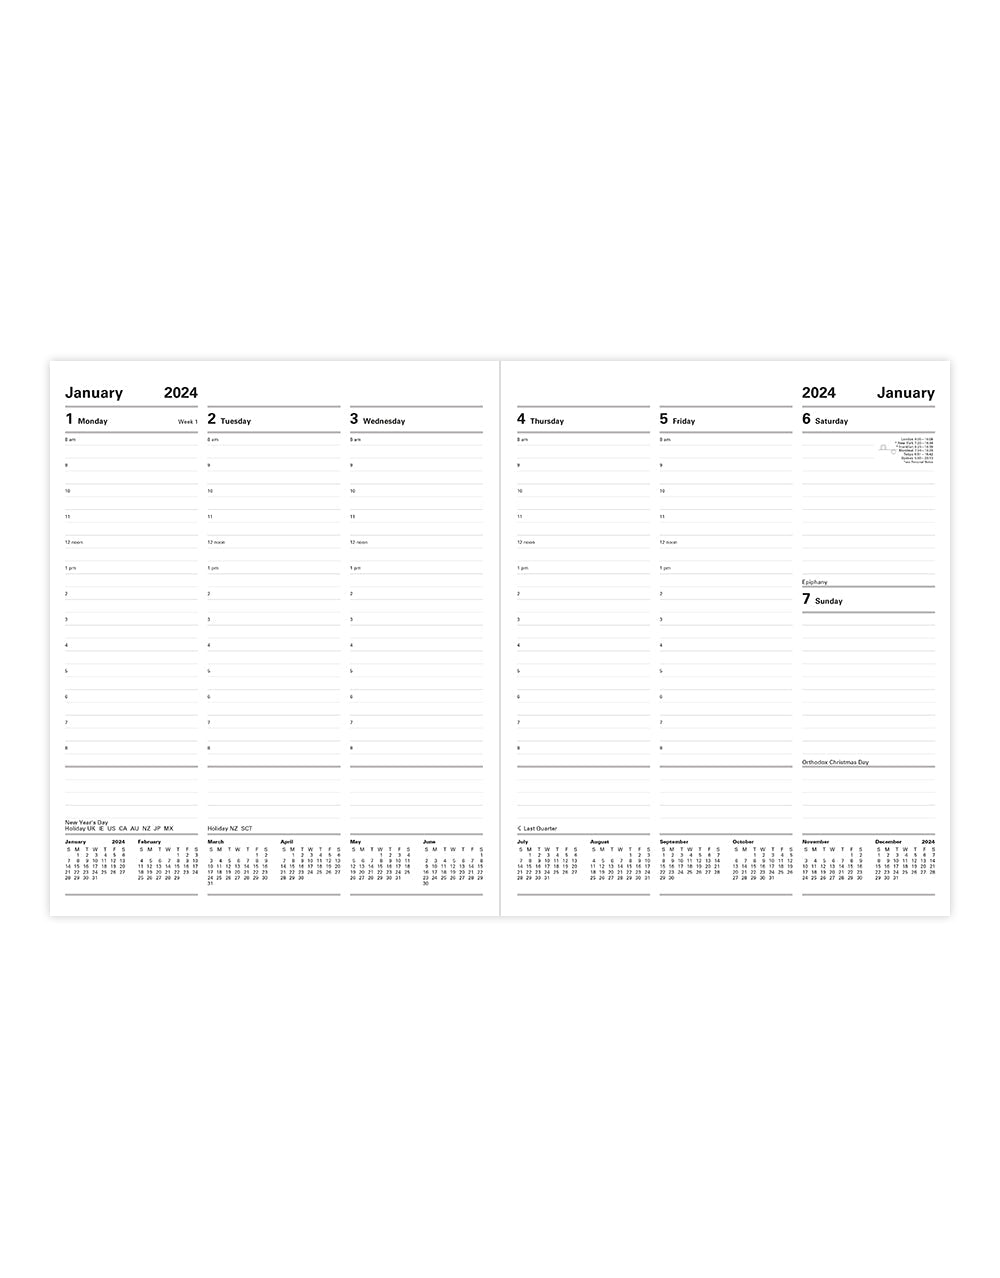 Letts of London 2024 Classic Quarto Vertical Week to View Planner with Appointments - Burgundy